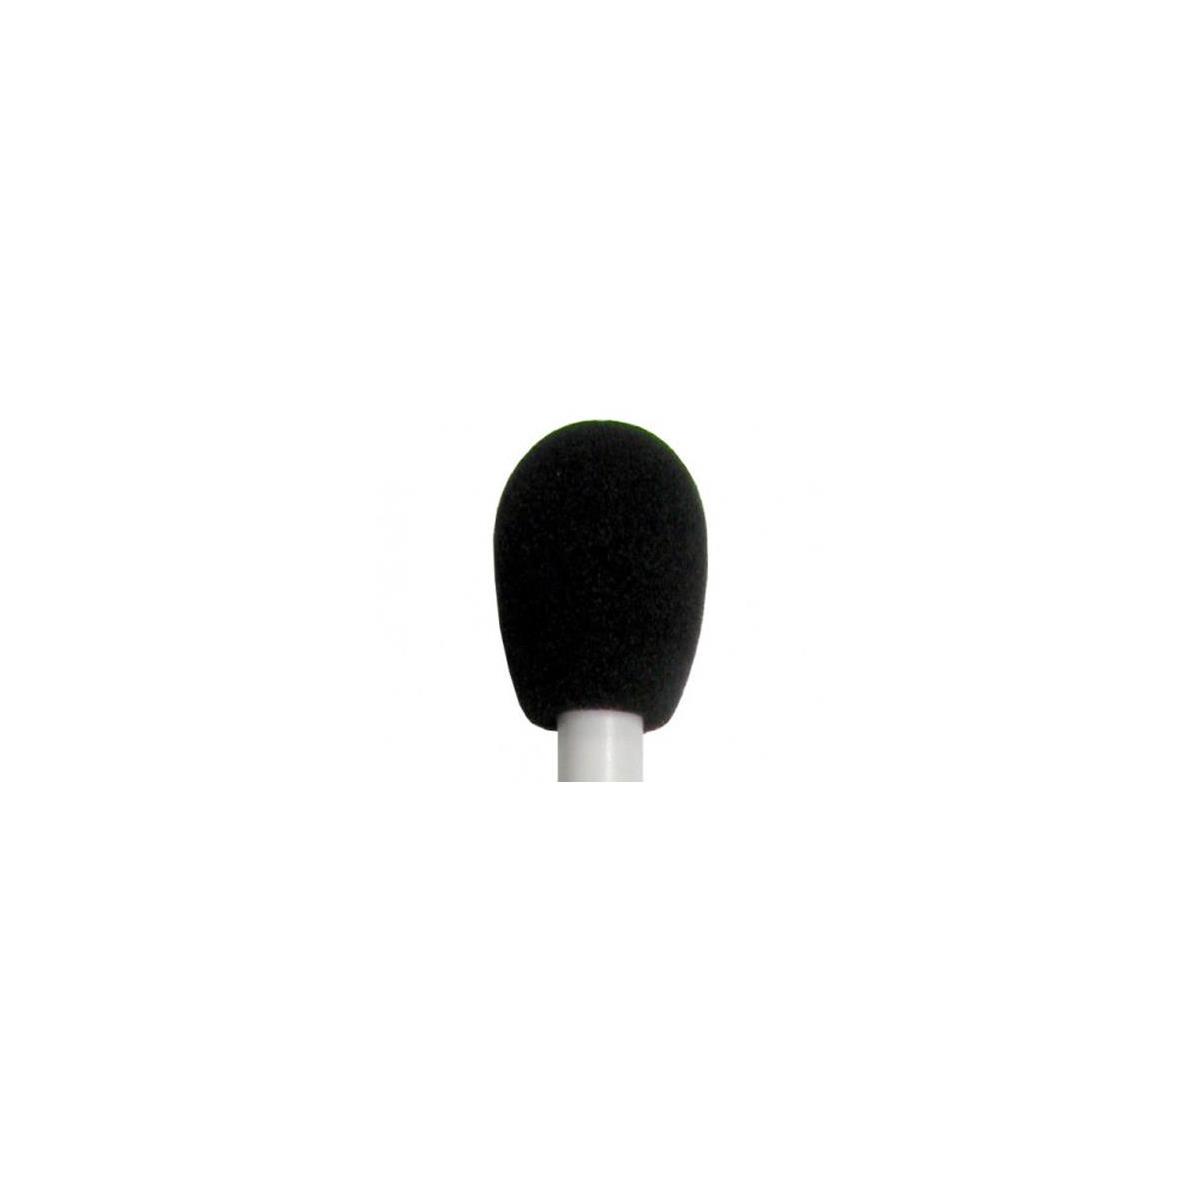 Image of Galaxy Audio Windscreen for CM-130 and CM-140 Sound Level Meter